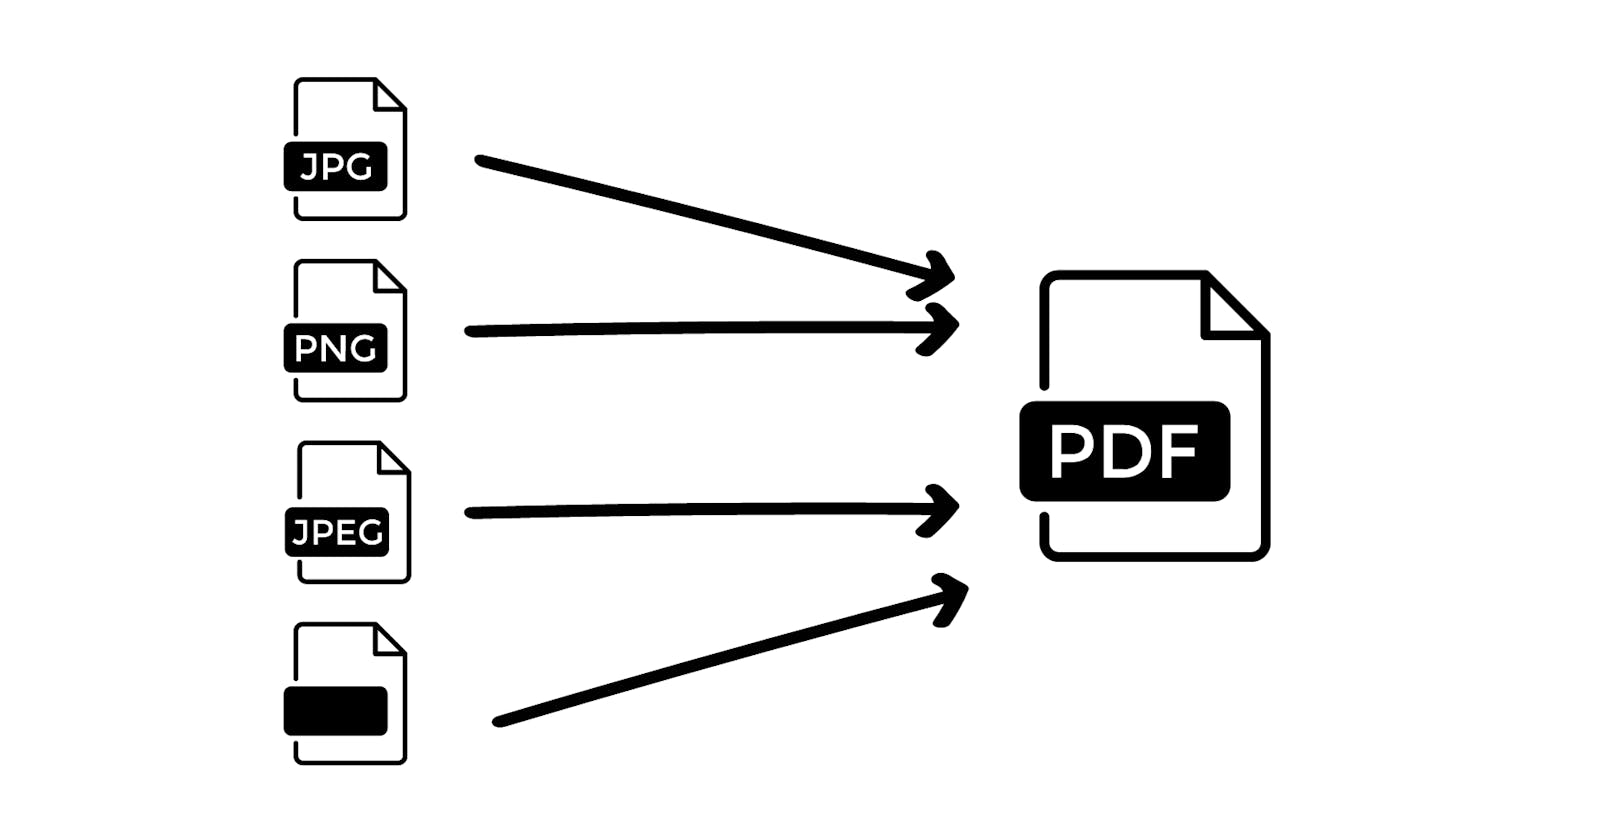 How to Convert Images to PDF in Python